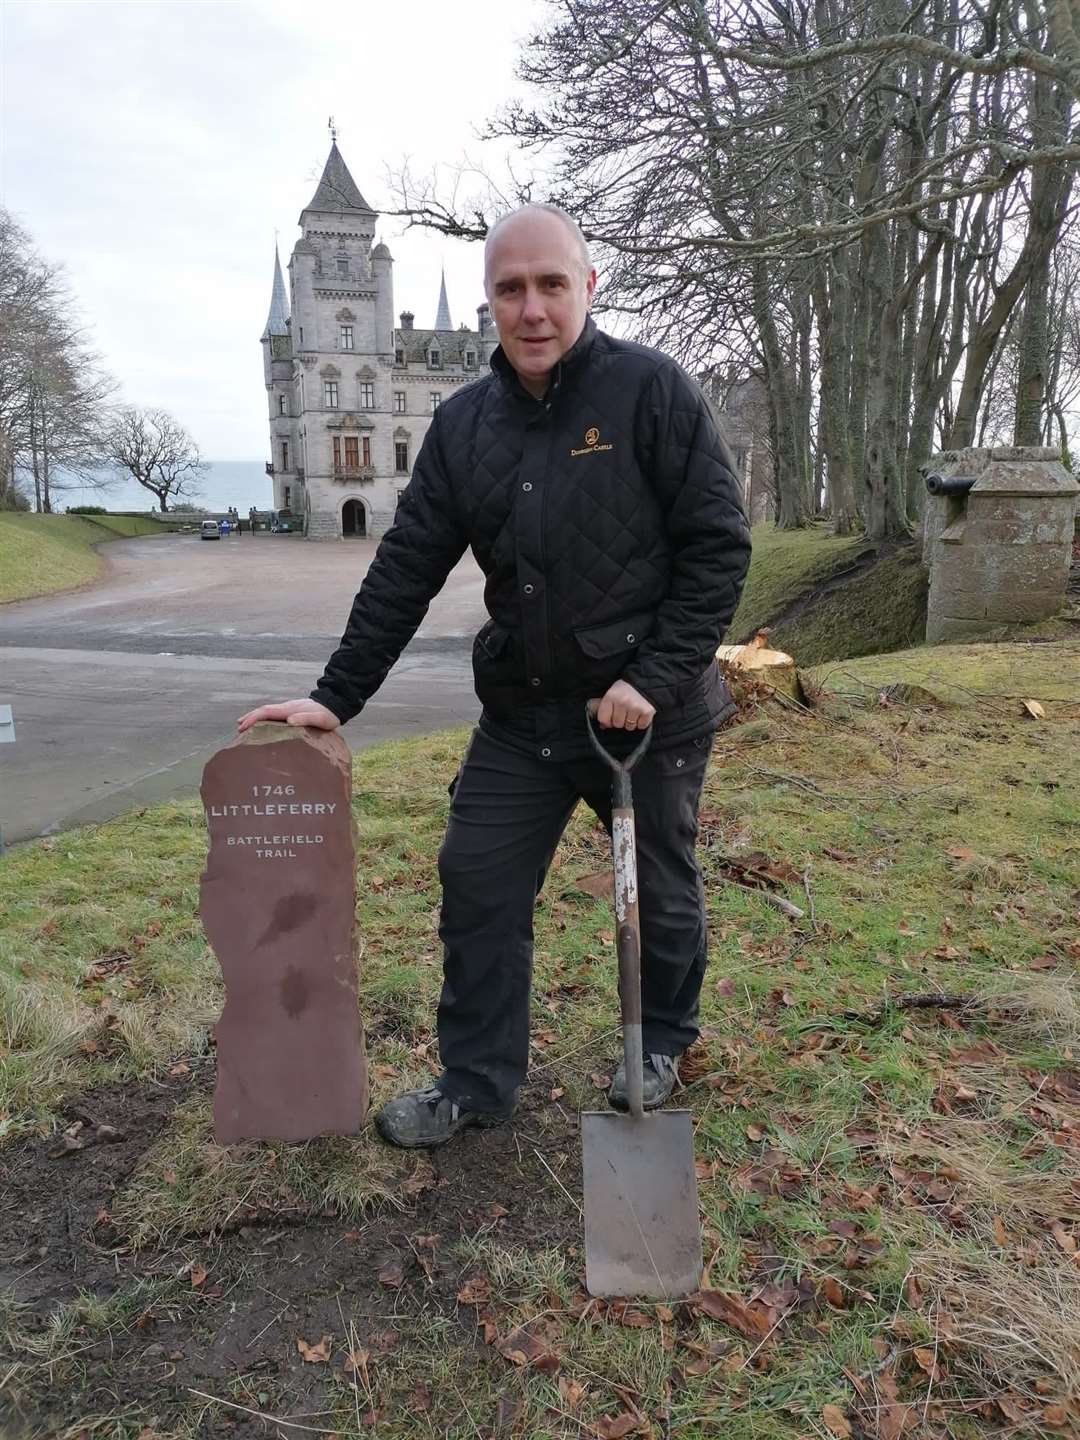 Dunrobin Castle general manager Scott Morrison laid the first marker on the battlefield trail.